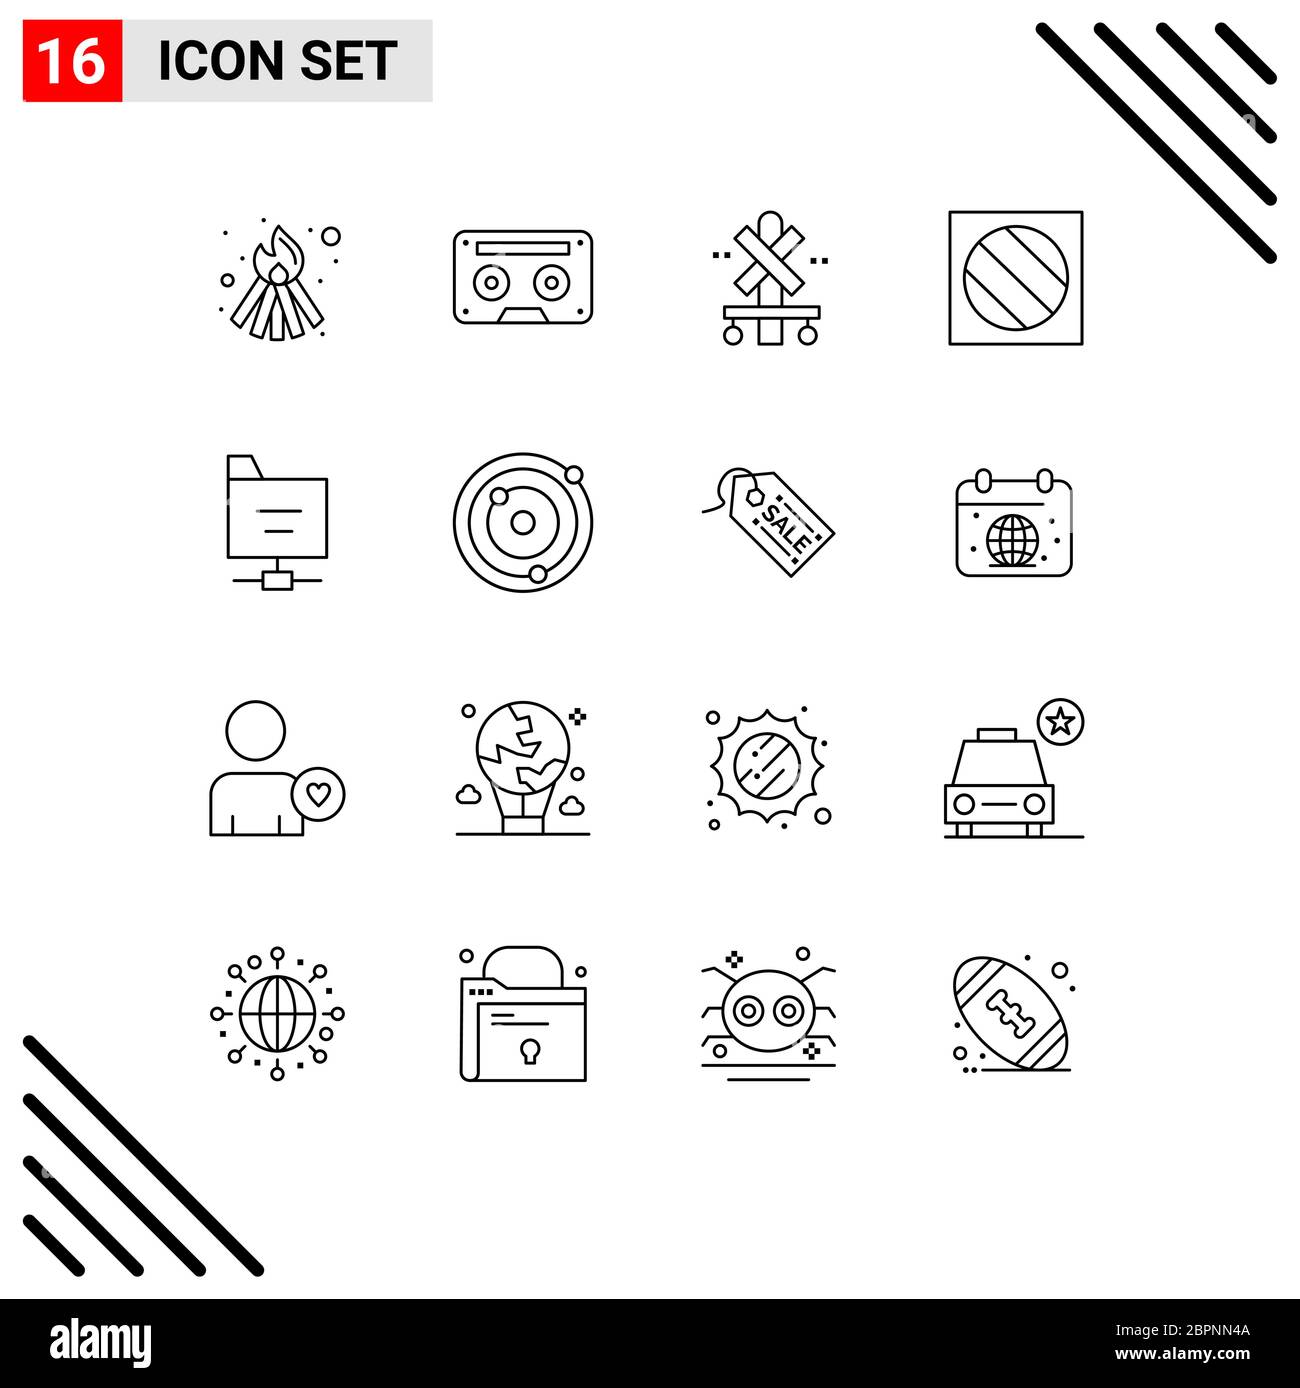 Universal Icon Symbols Group of 16 Modern Outlines of folder, shadow, cross, photo, full shadow Editable Vector Design Elements Stock Vector